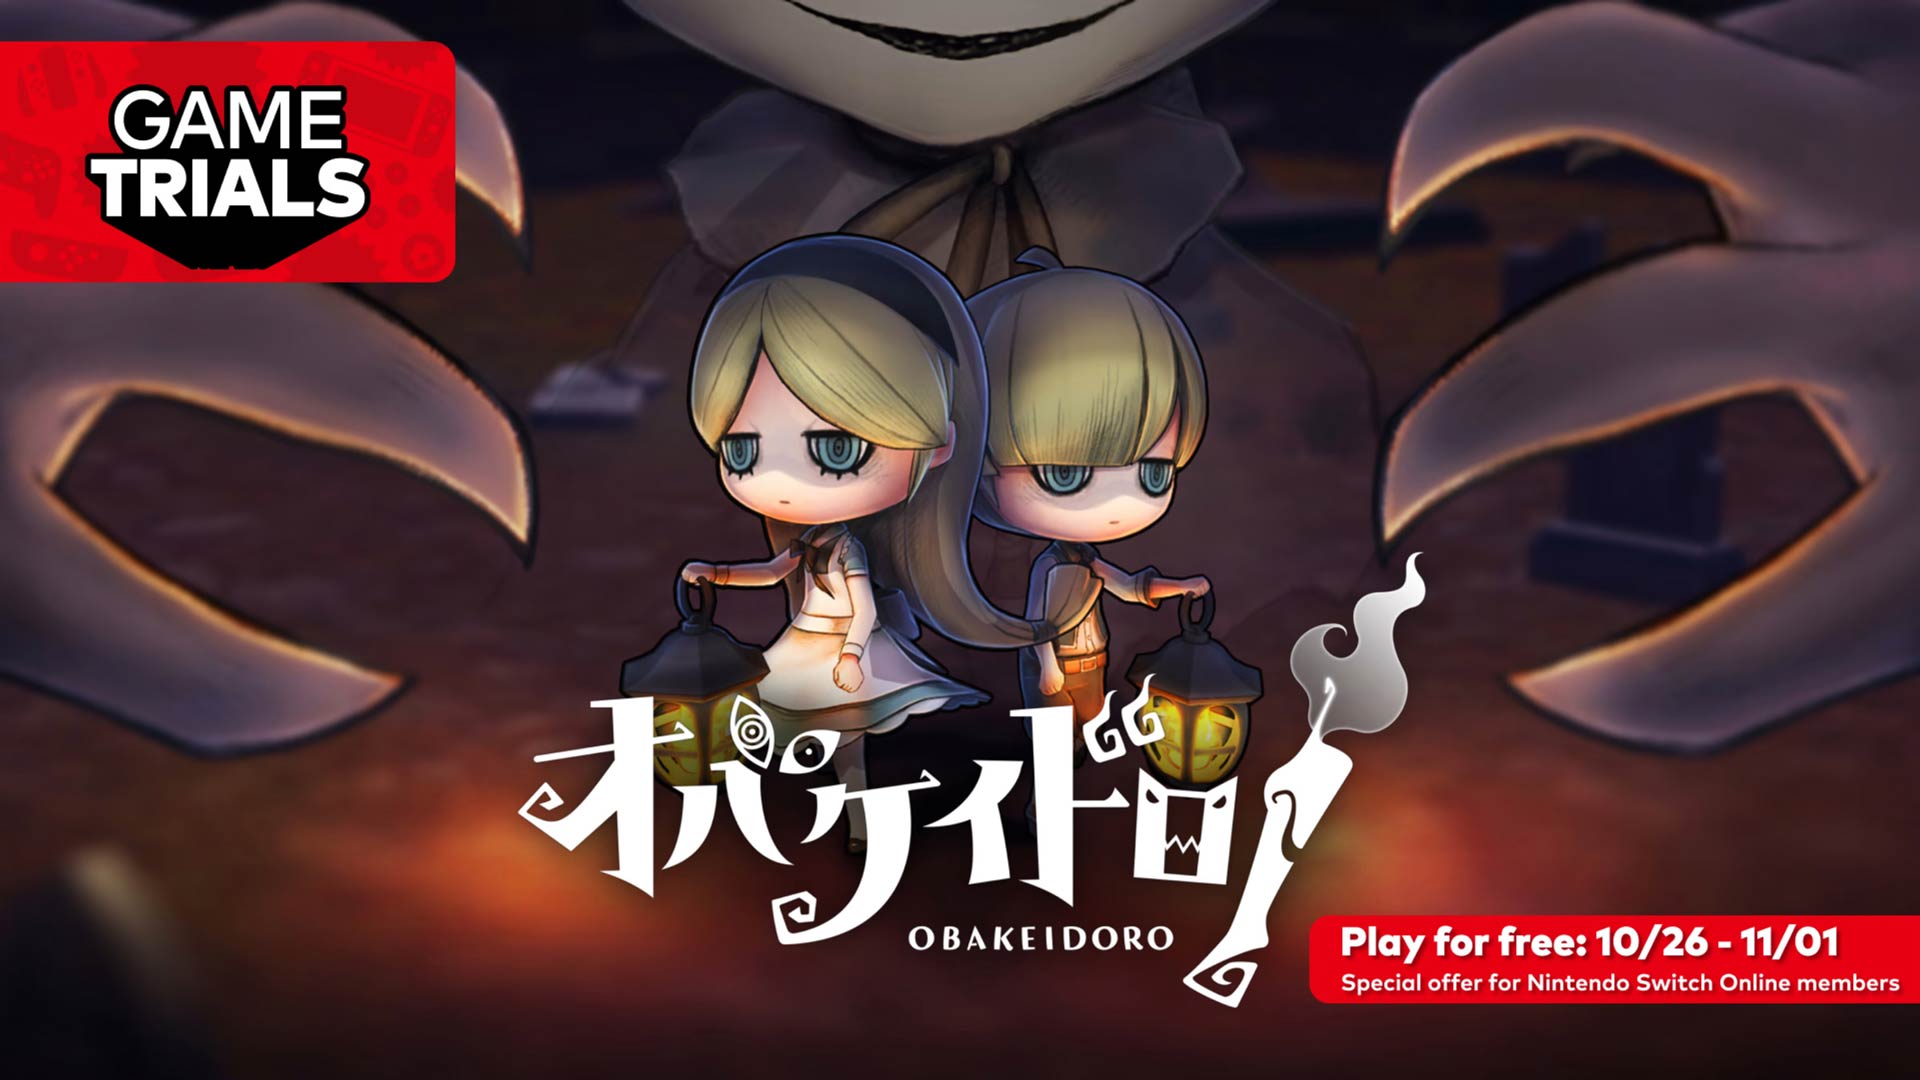 Obakeidoro free to play for Nintendo Switch Online subscribers